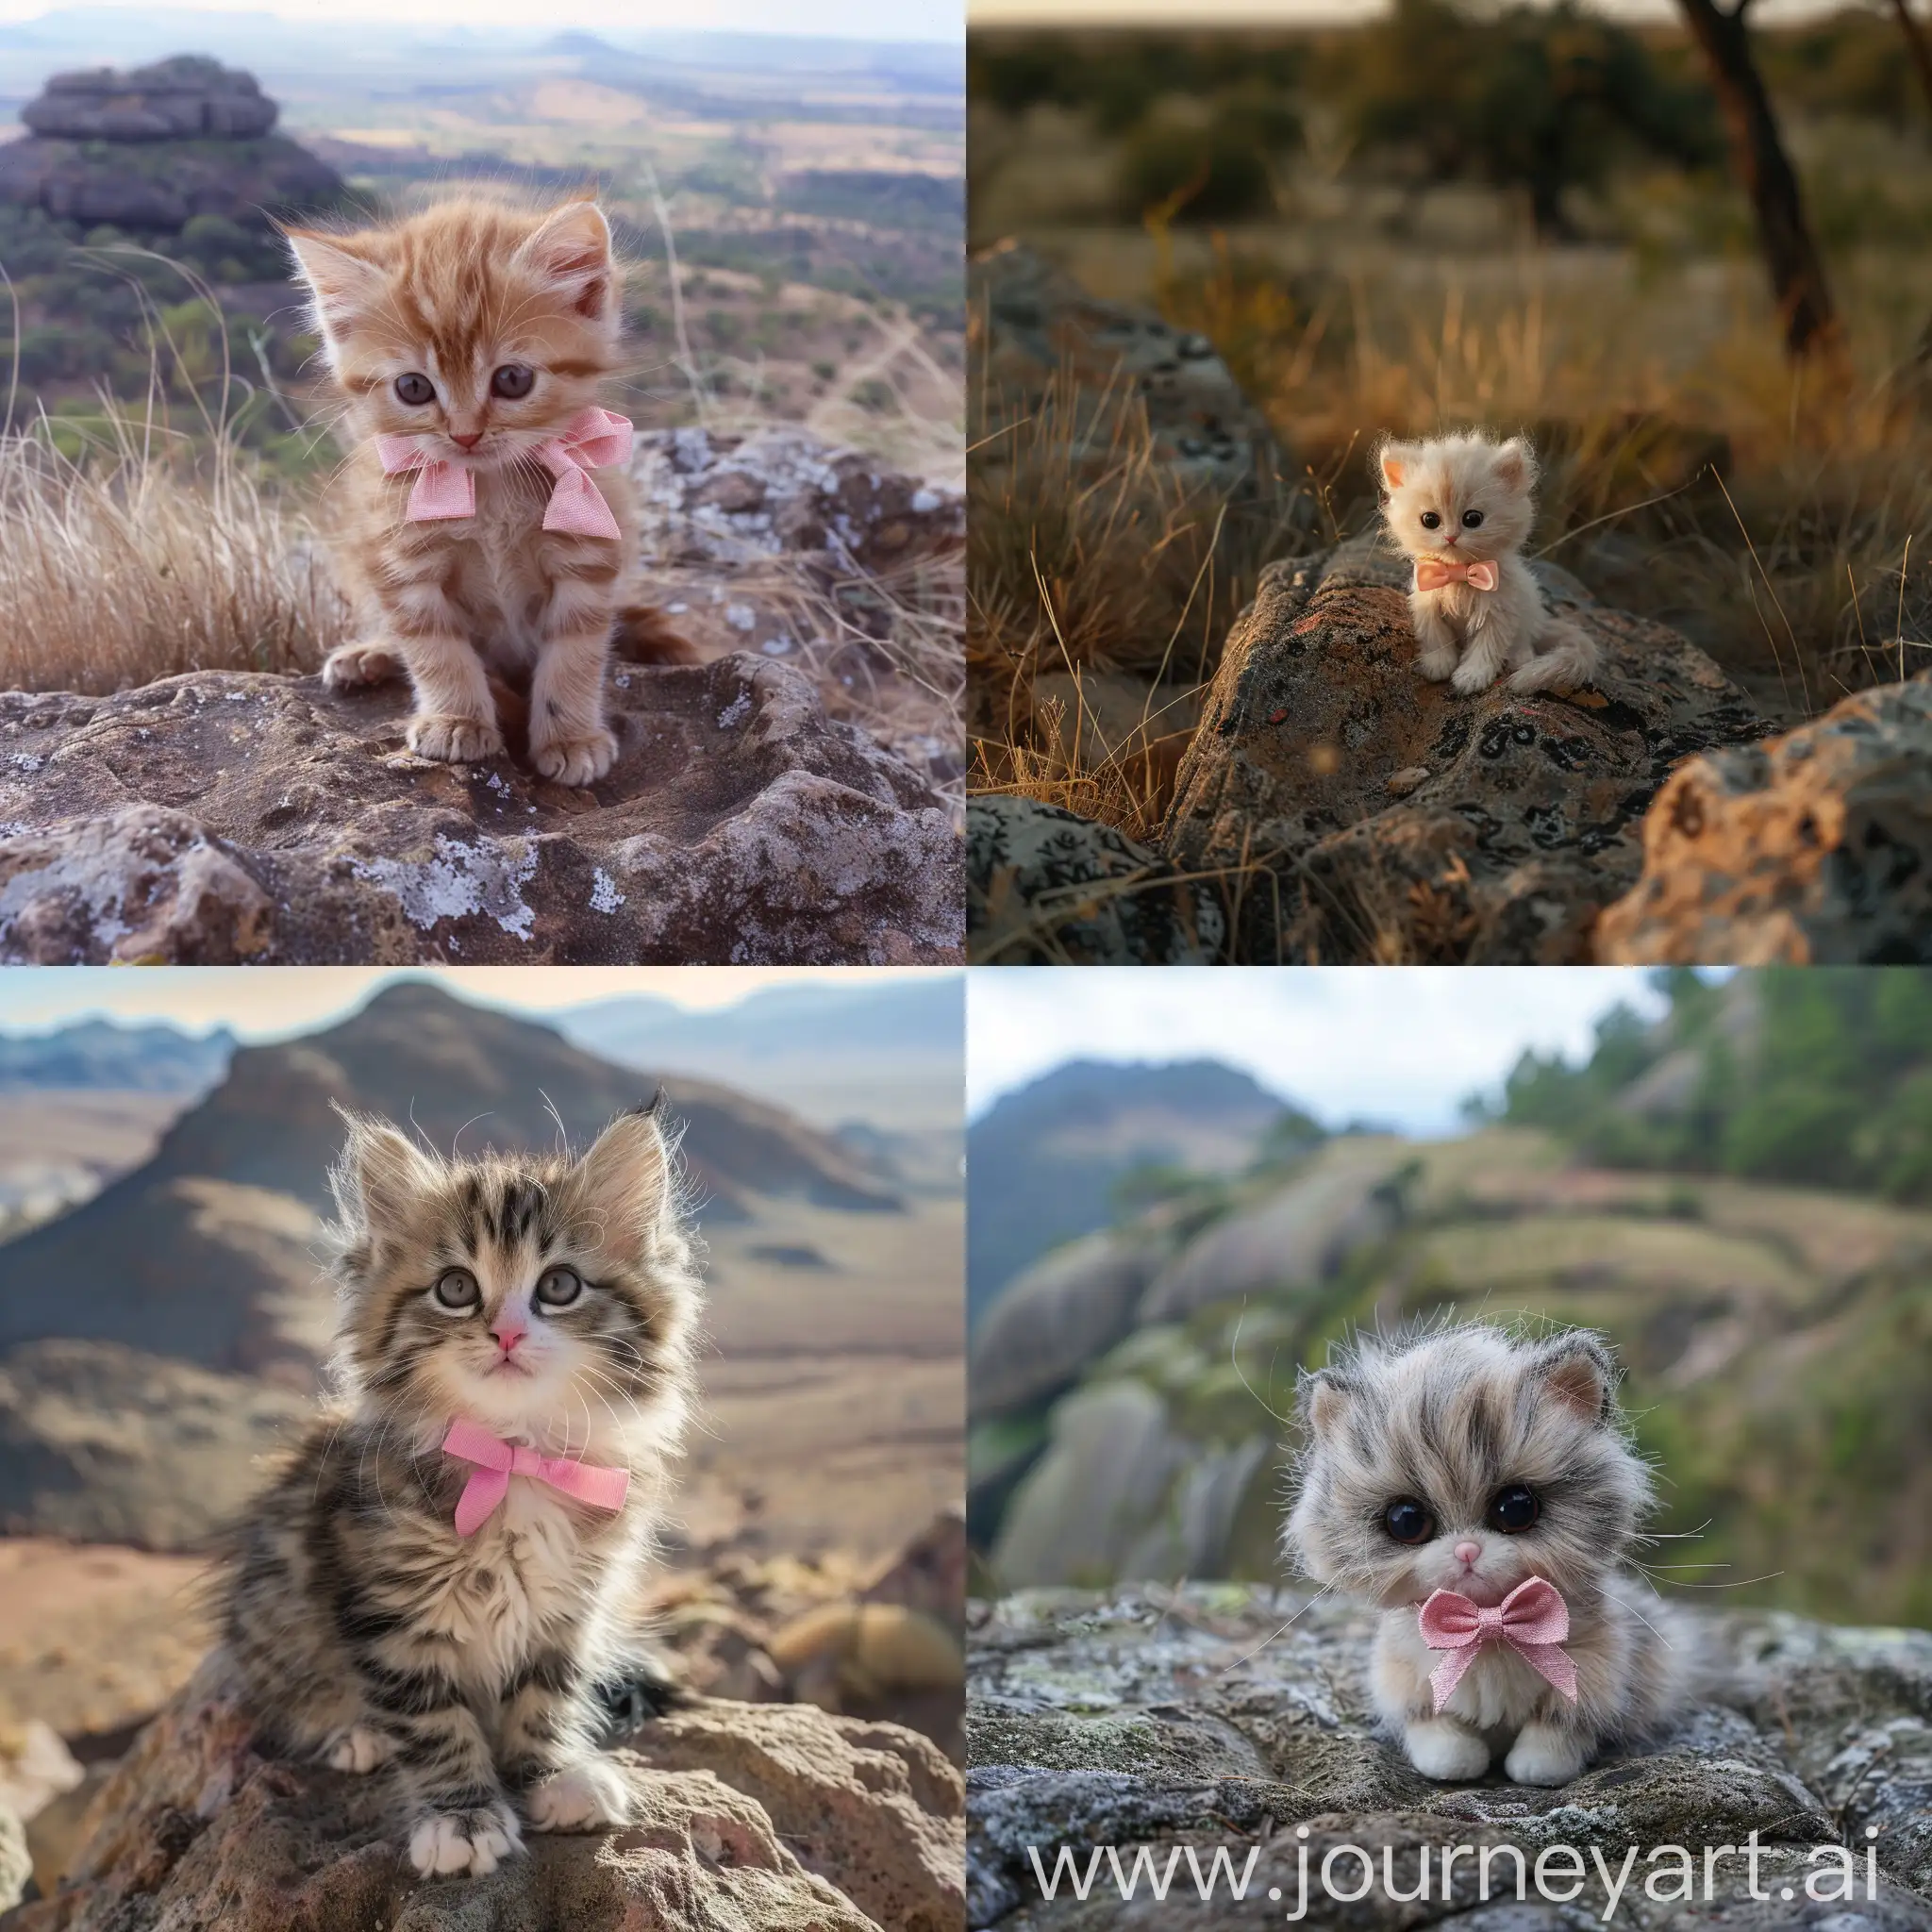 Chibi-Kitten-with-Pink-Bow-on-Royal-Rock-in-African-Landscape